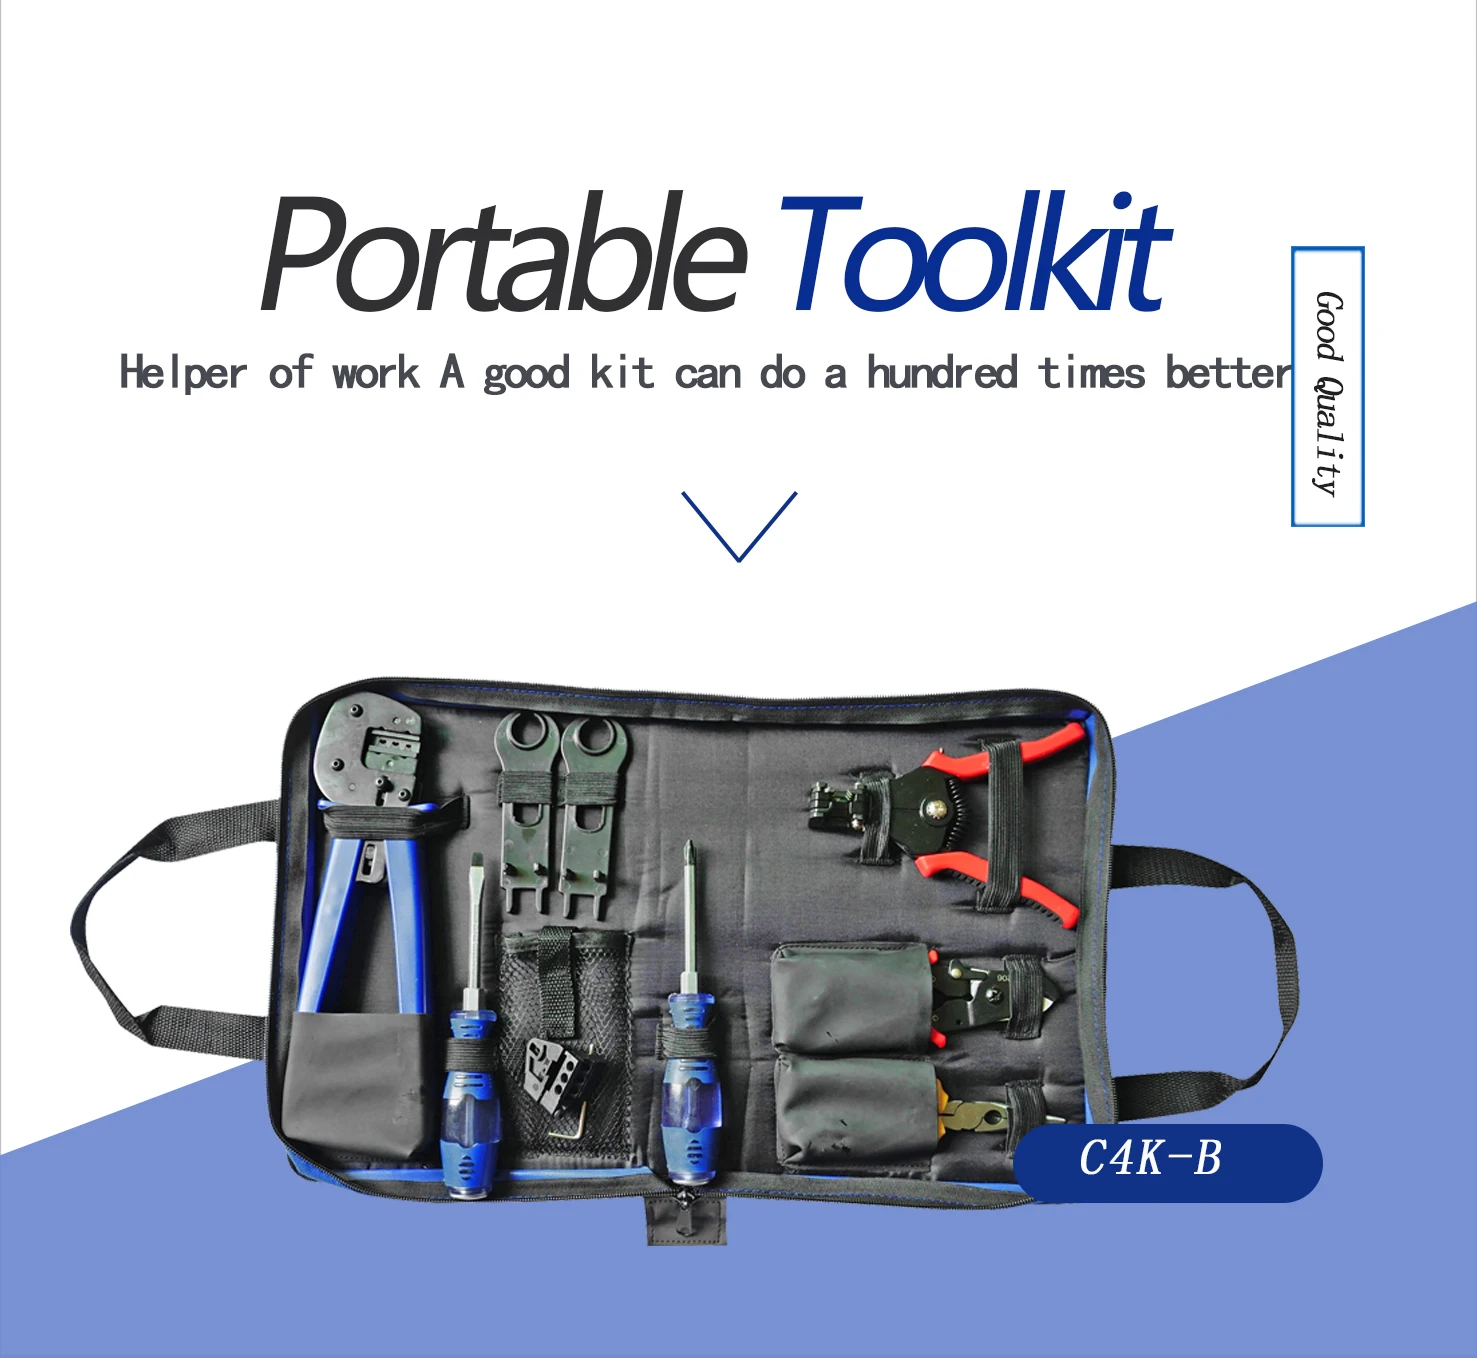 Cable Installation pv tool kit C4K-B solar cable stripper hand Tool For Assembly Solar Panel